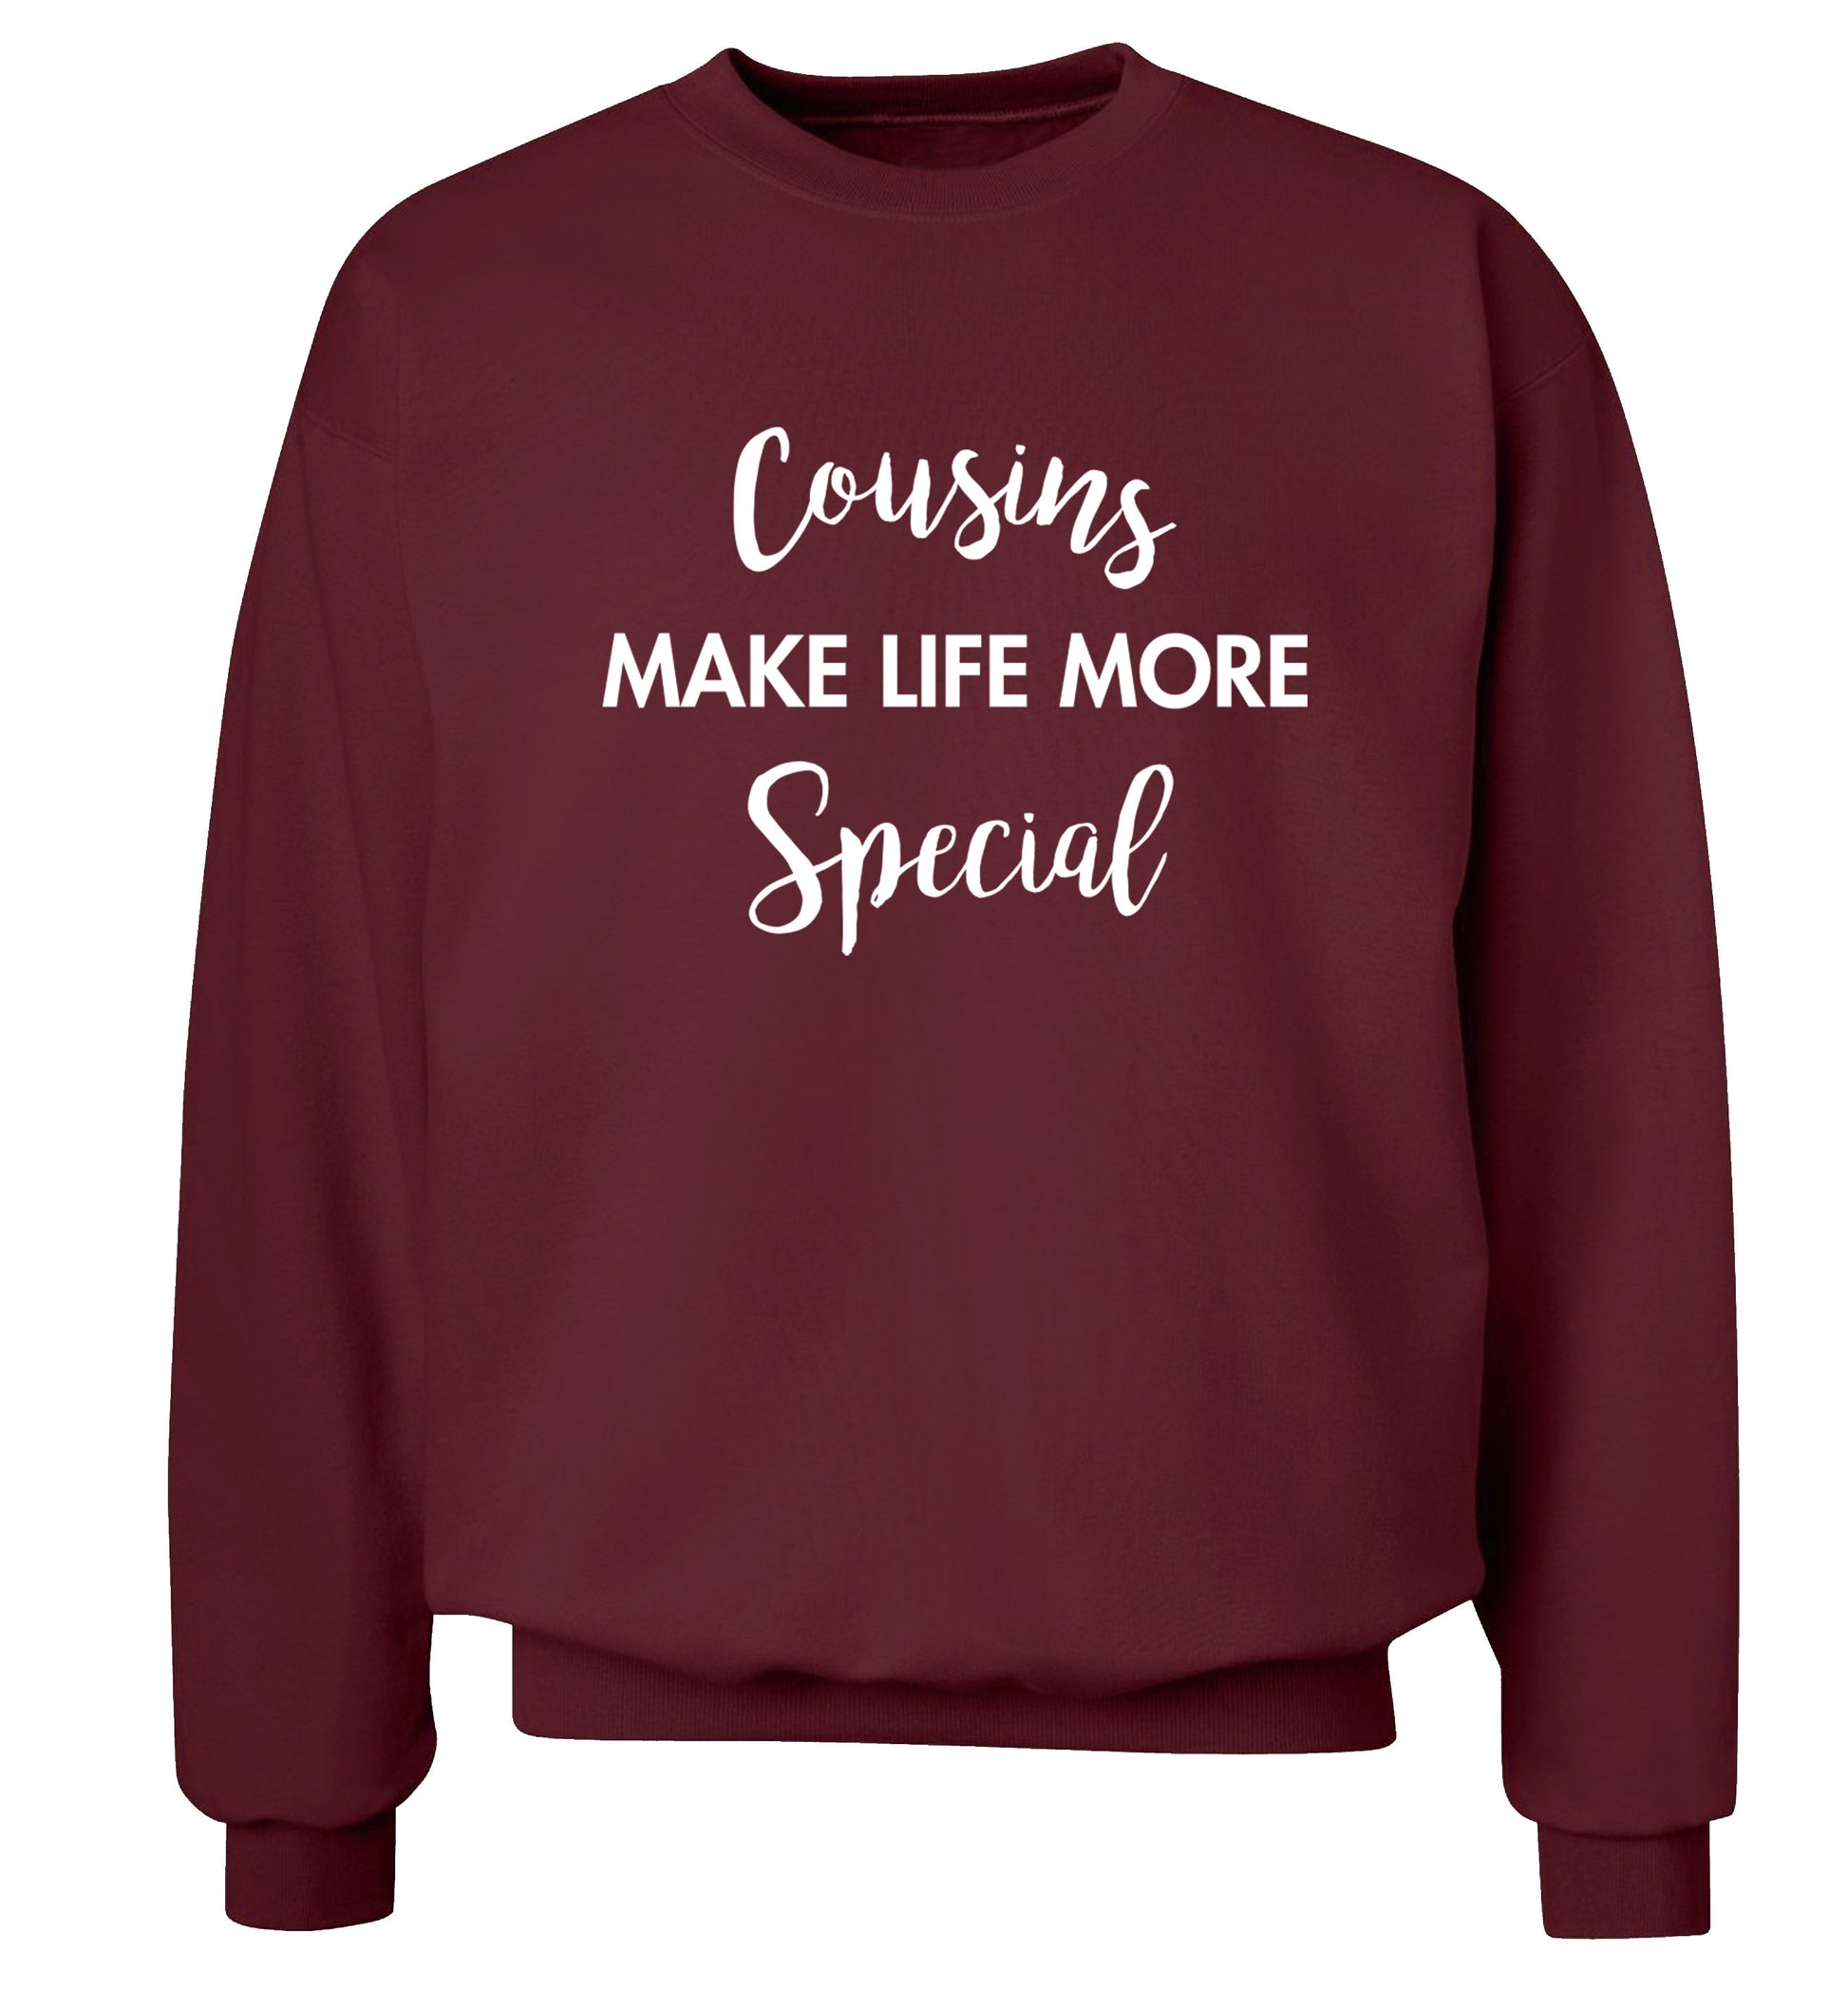 Cousins make life more special Adult's unisex maroon Sweater 2XL